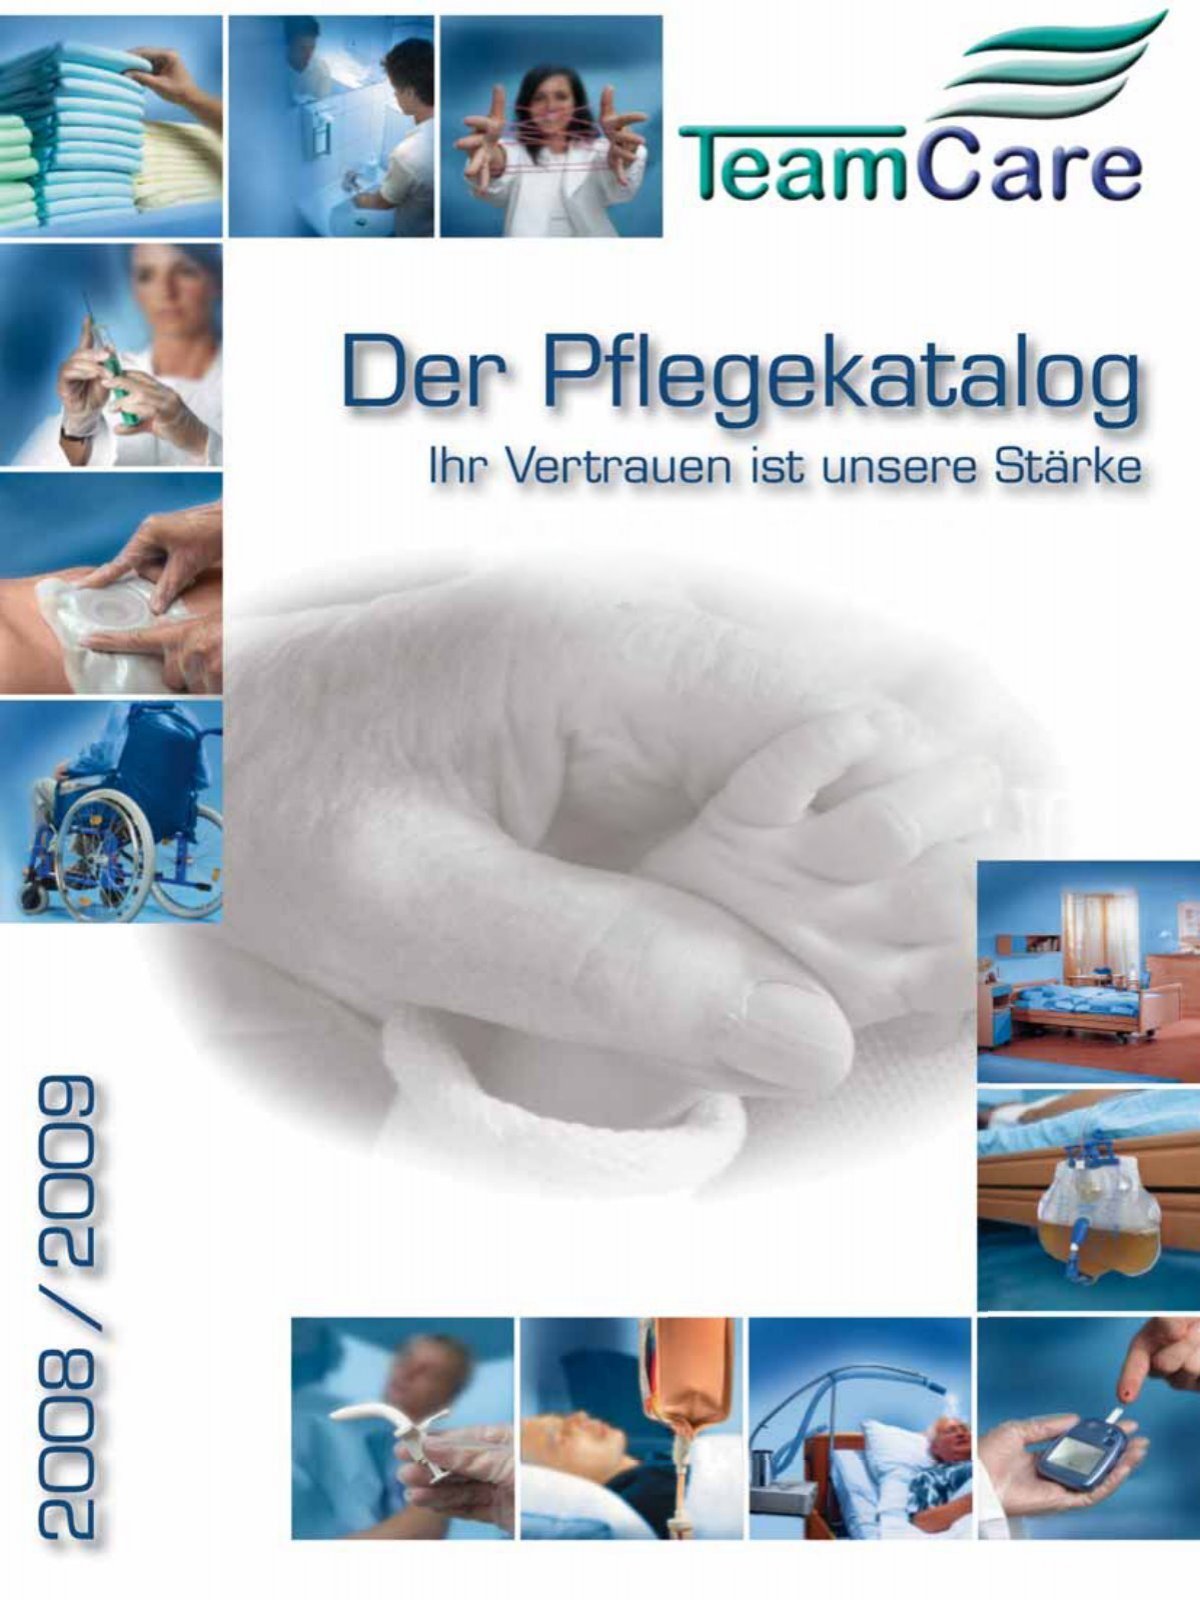 medical products - teamcare.de